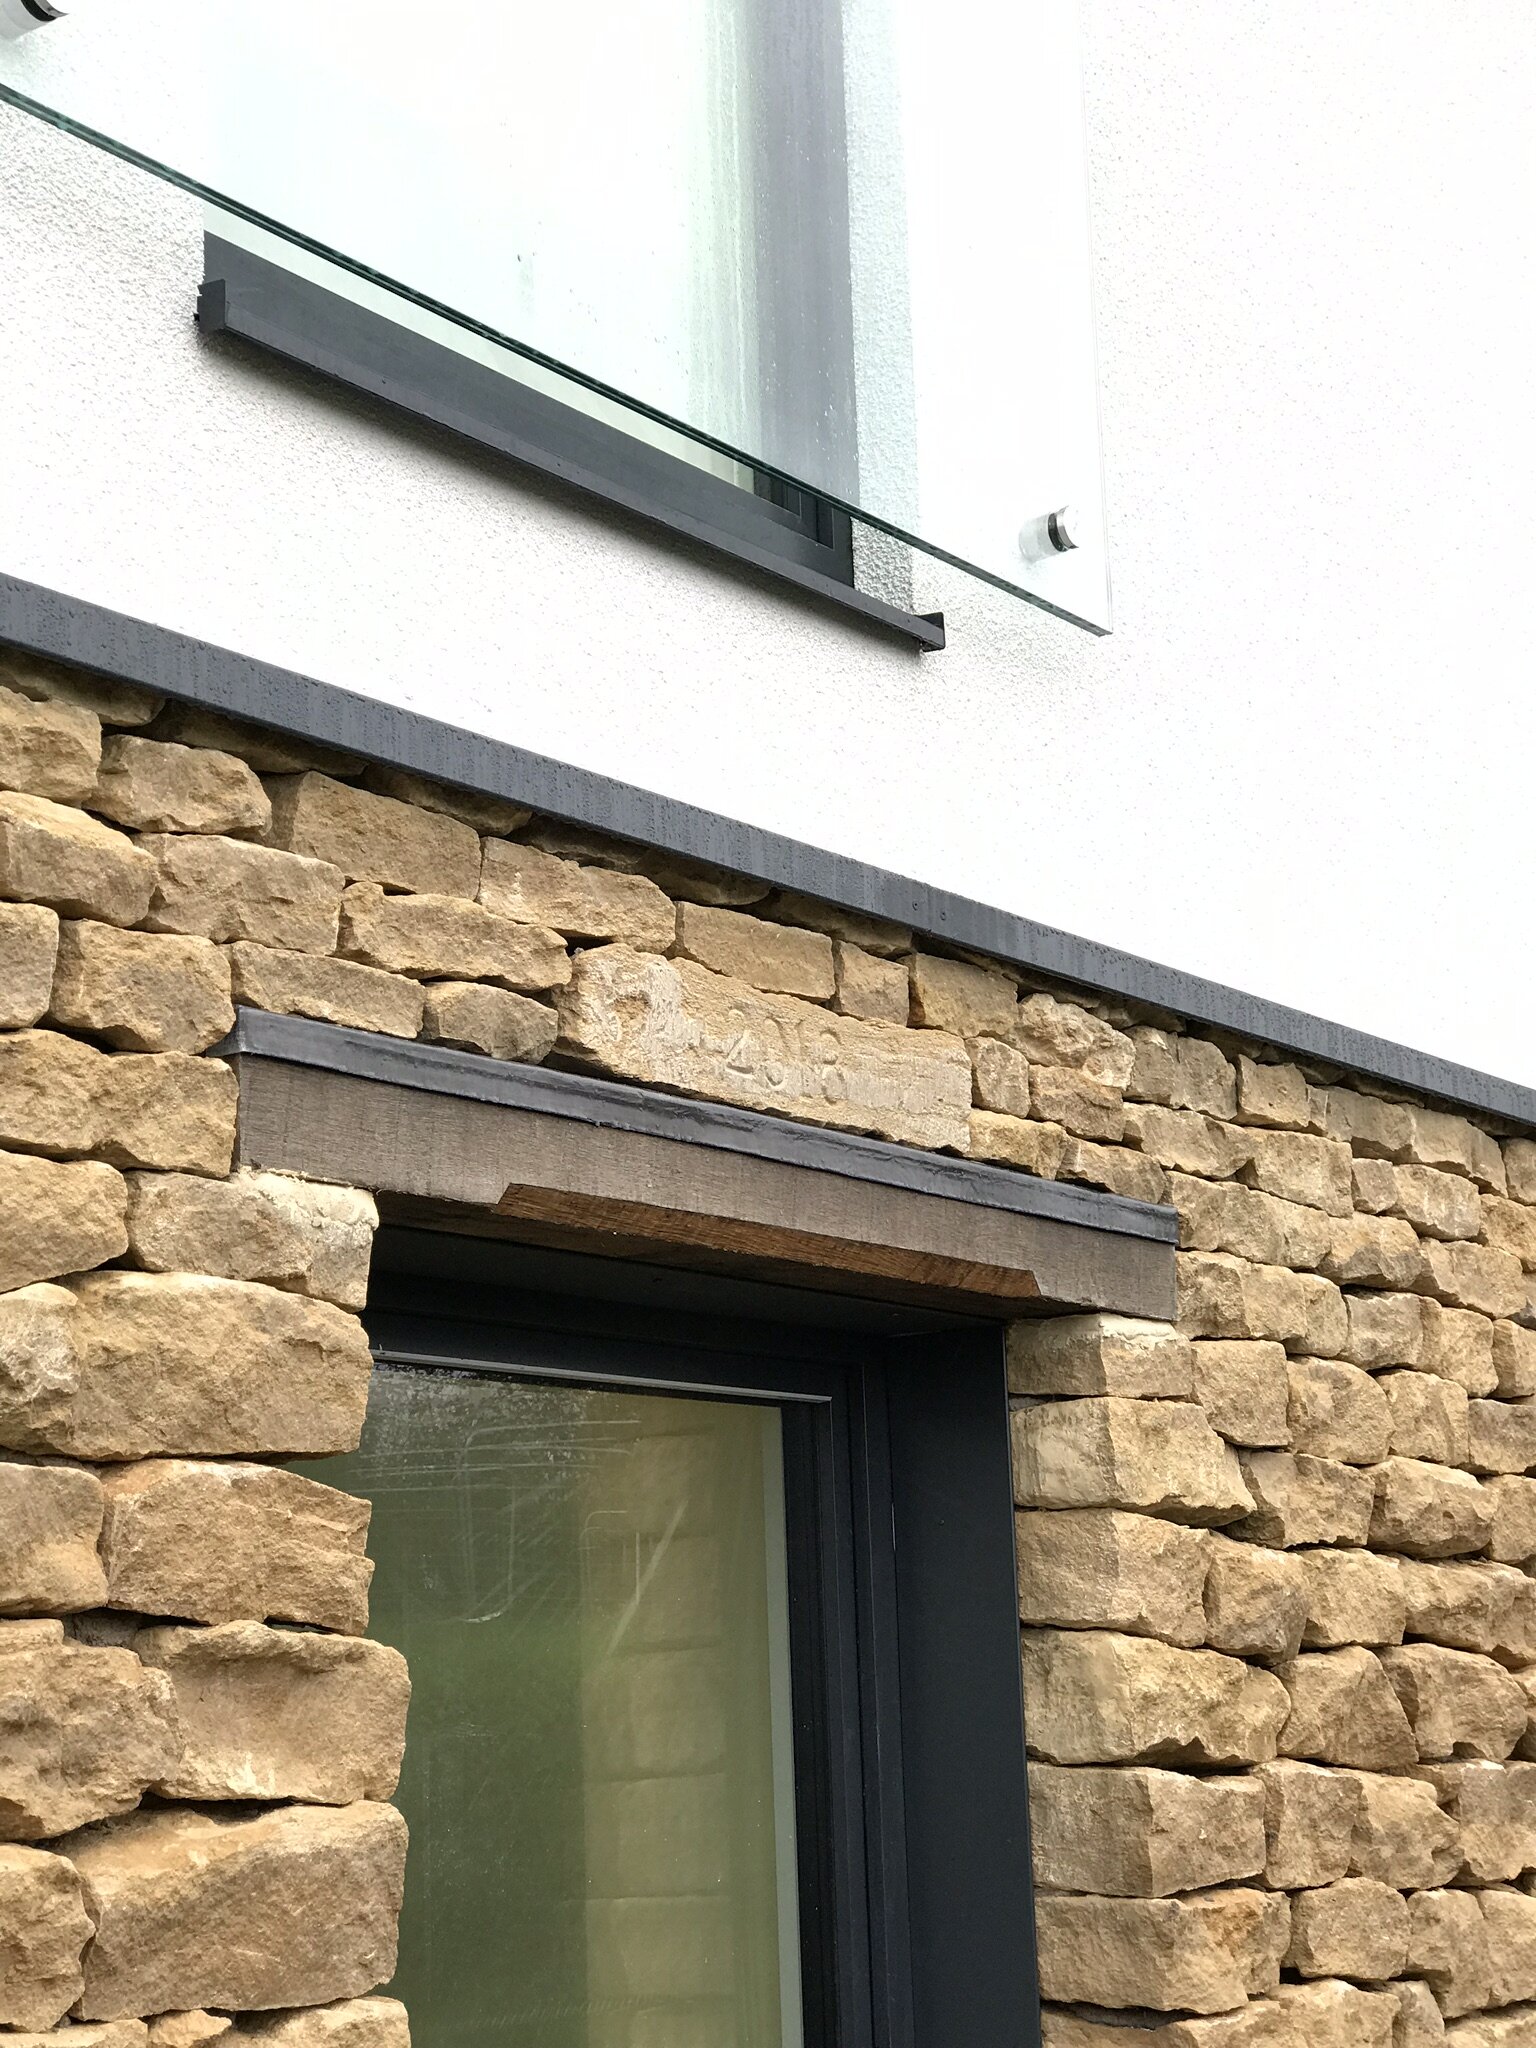  The combination of natural materials; rubble stone and oak lintels against crisp modern metal trims and smooth render makes the home seem very organic as if it has grown out of the ground. 